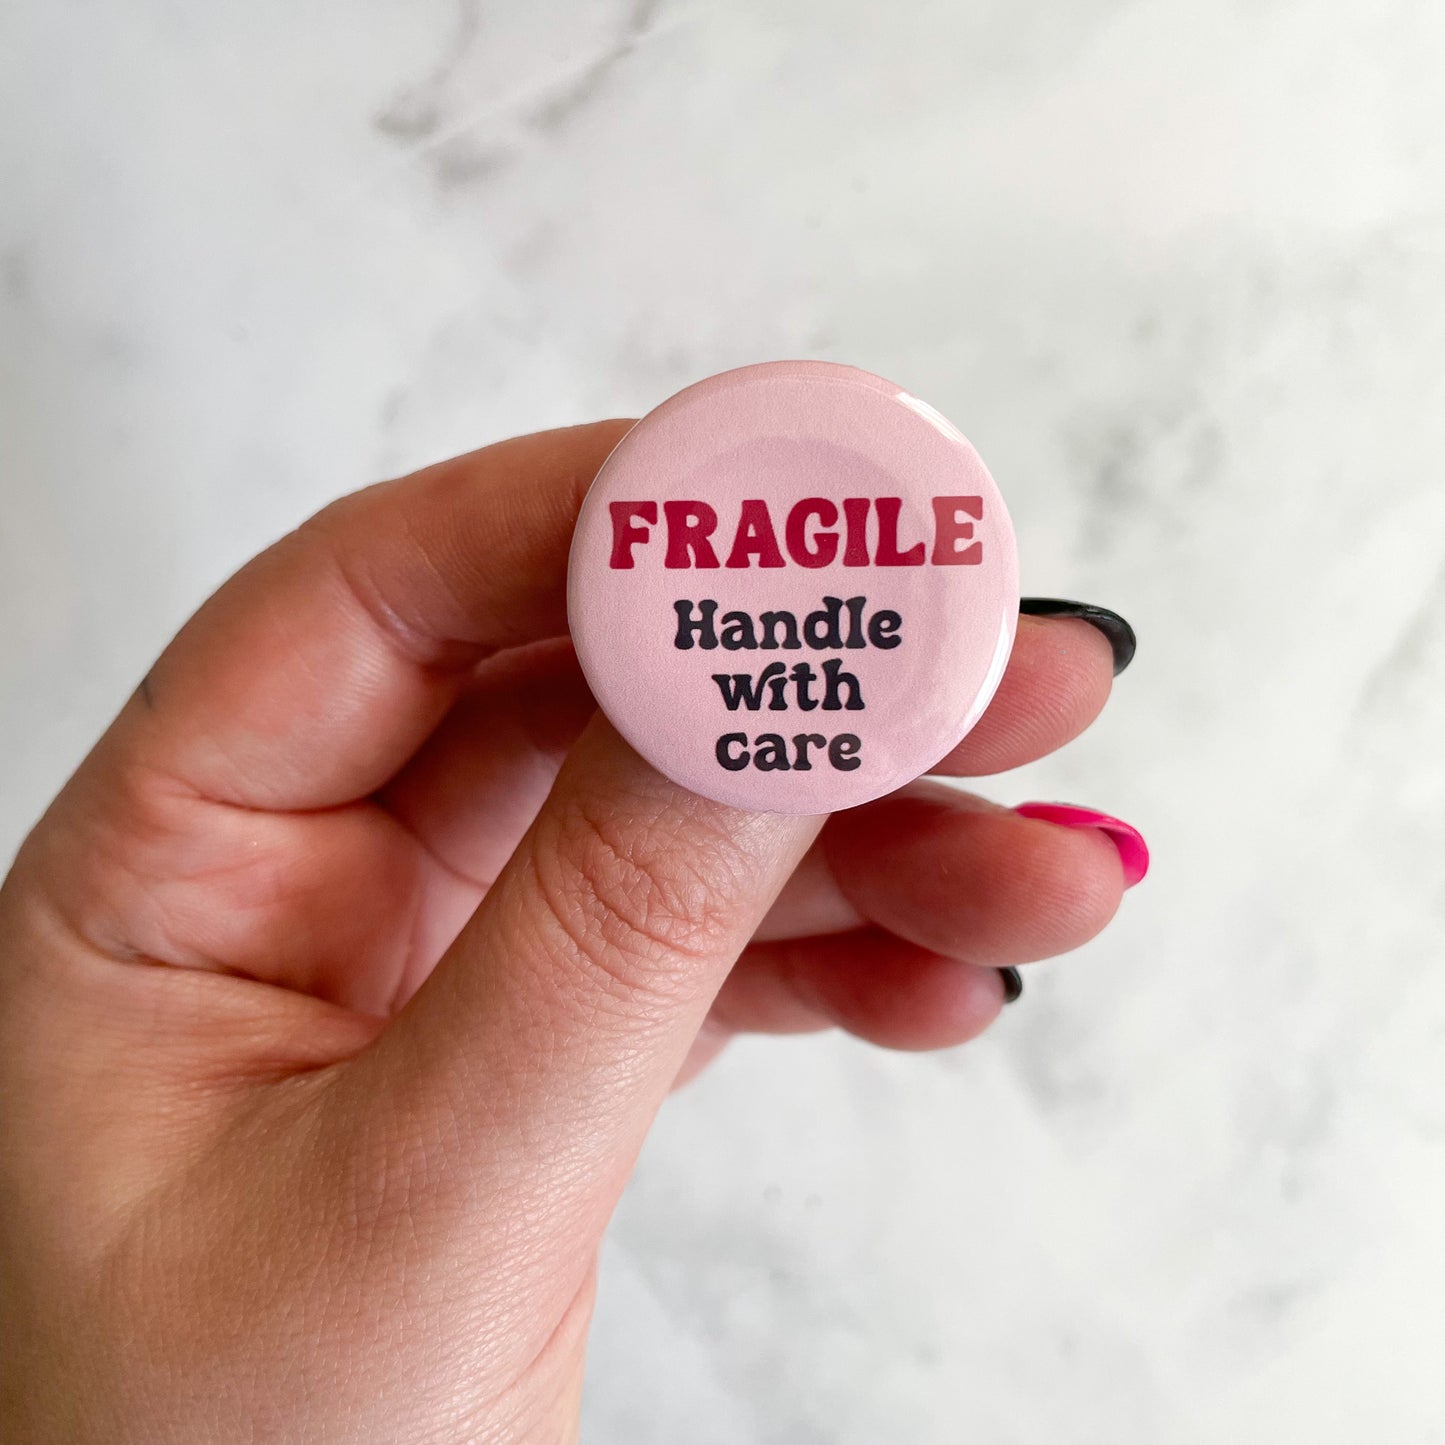 Fragile Handle With Care Button / Badge (Buy 4 Get 1 FREE)